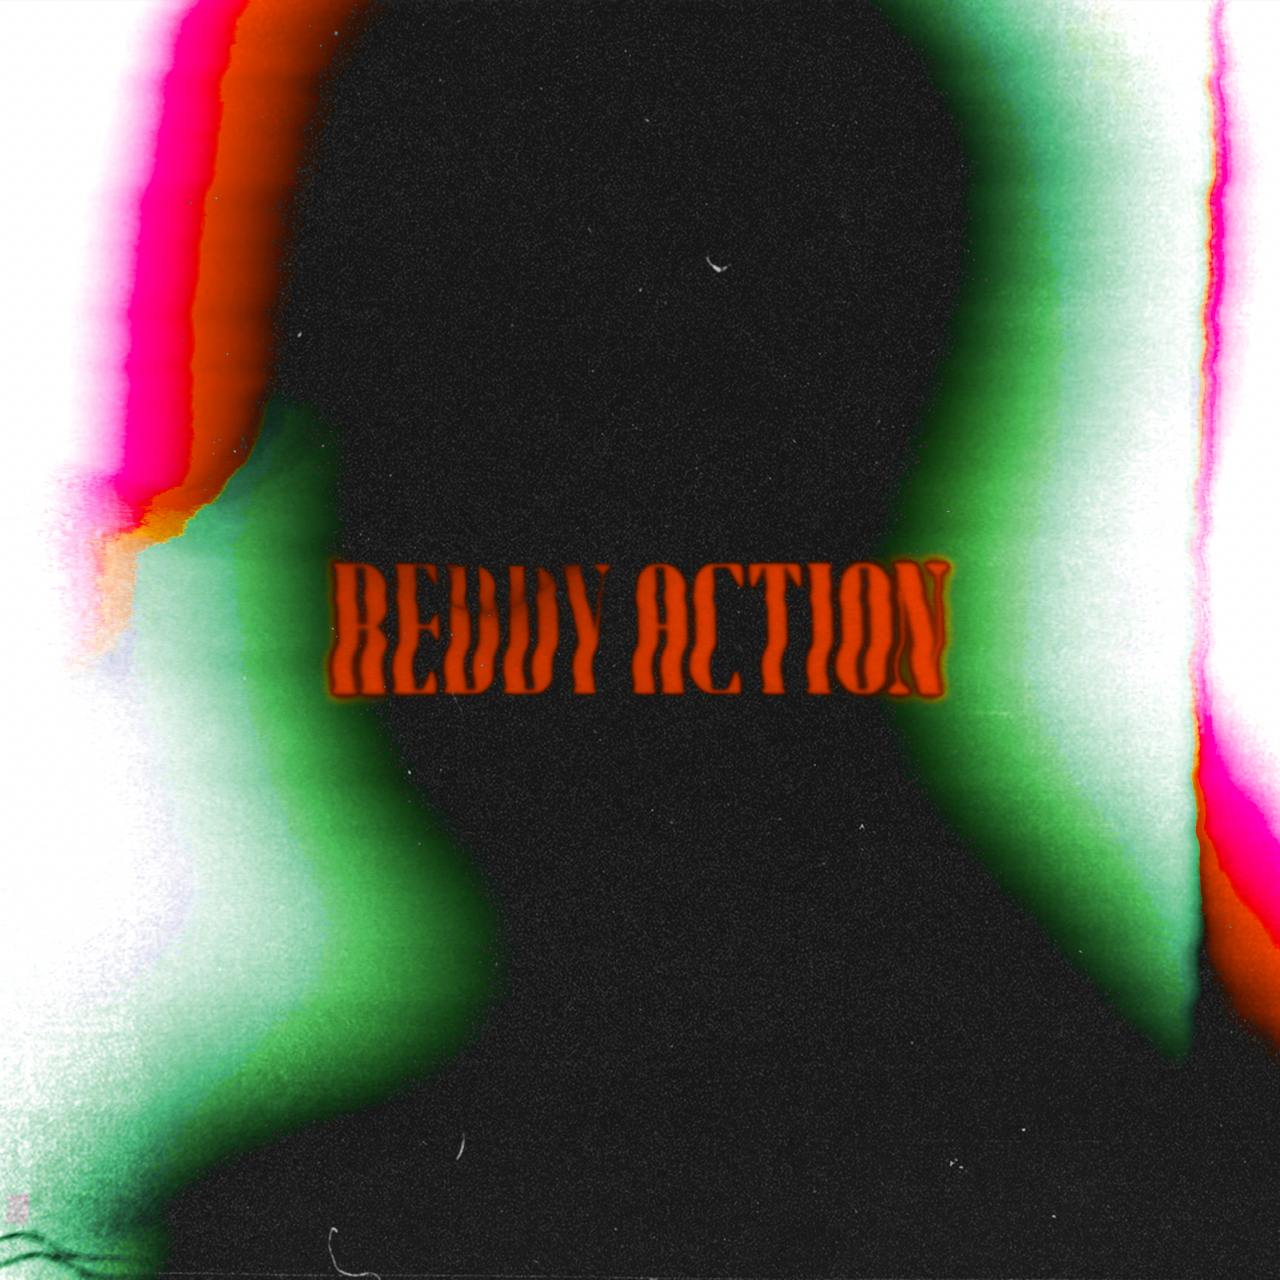 Album cover for Reddy’s “Reddy Action” (131 (ONE THREE ONE))